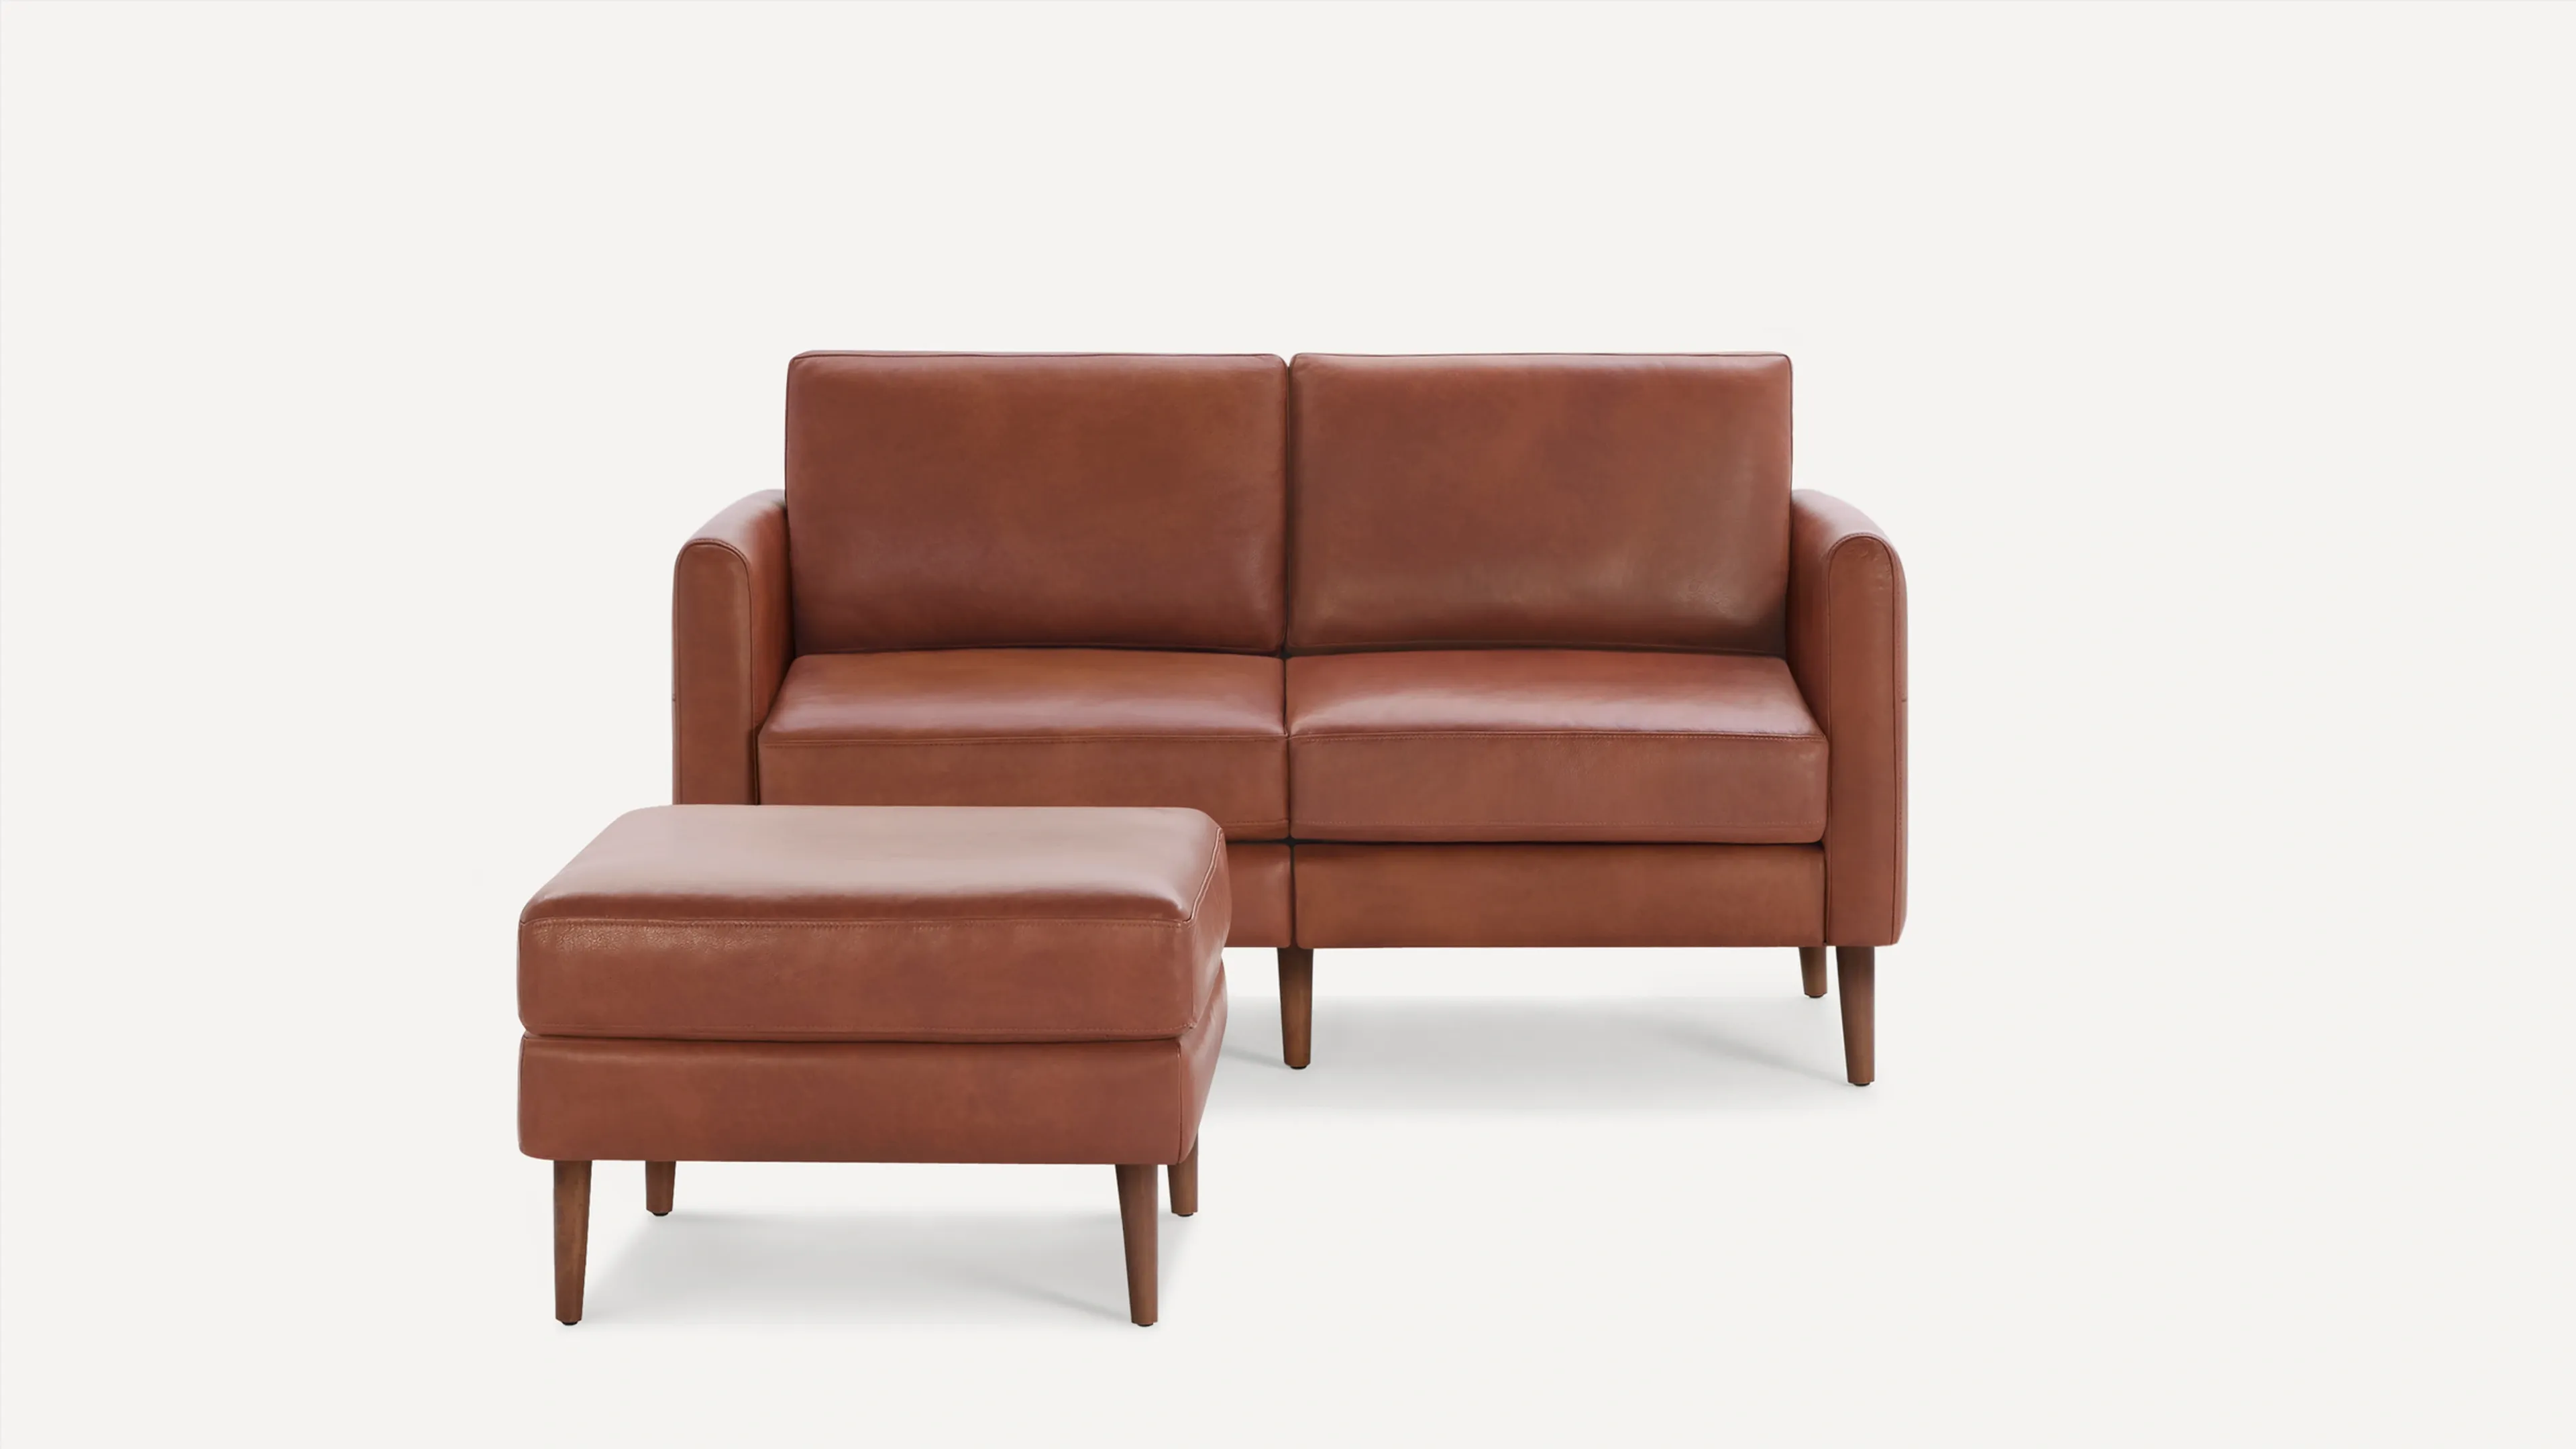 Original Nomad Loveseat with Ottoman in Chestnut Leather